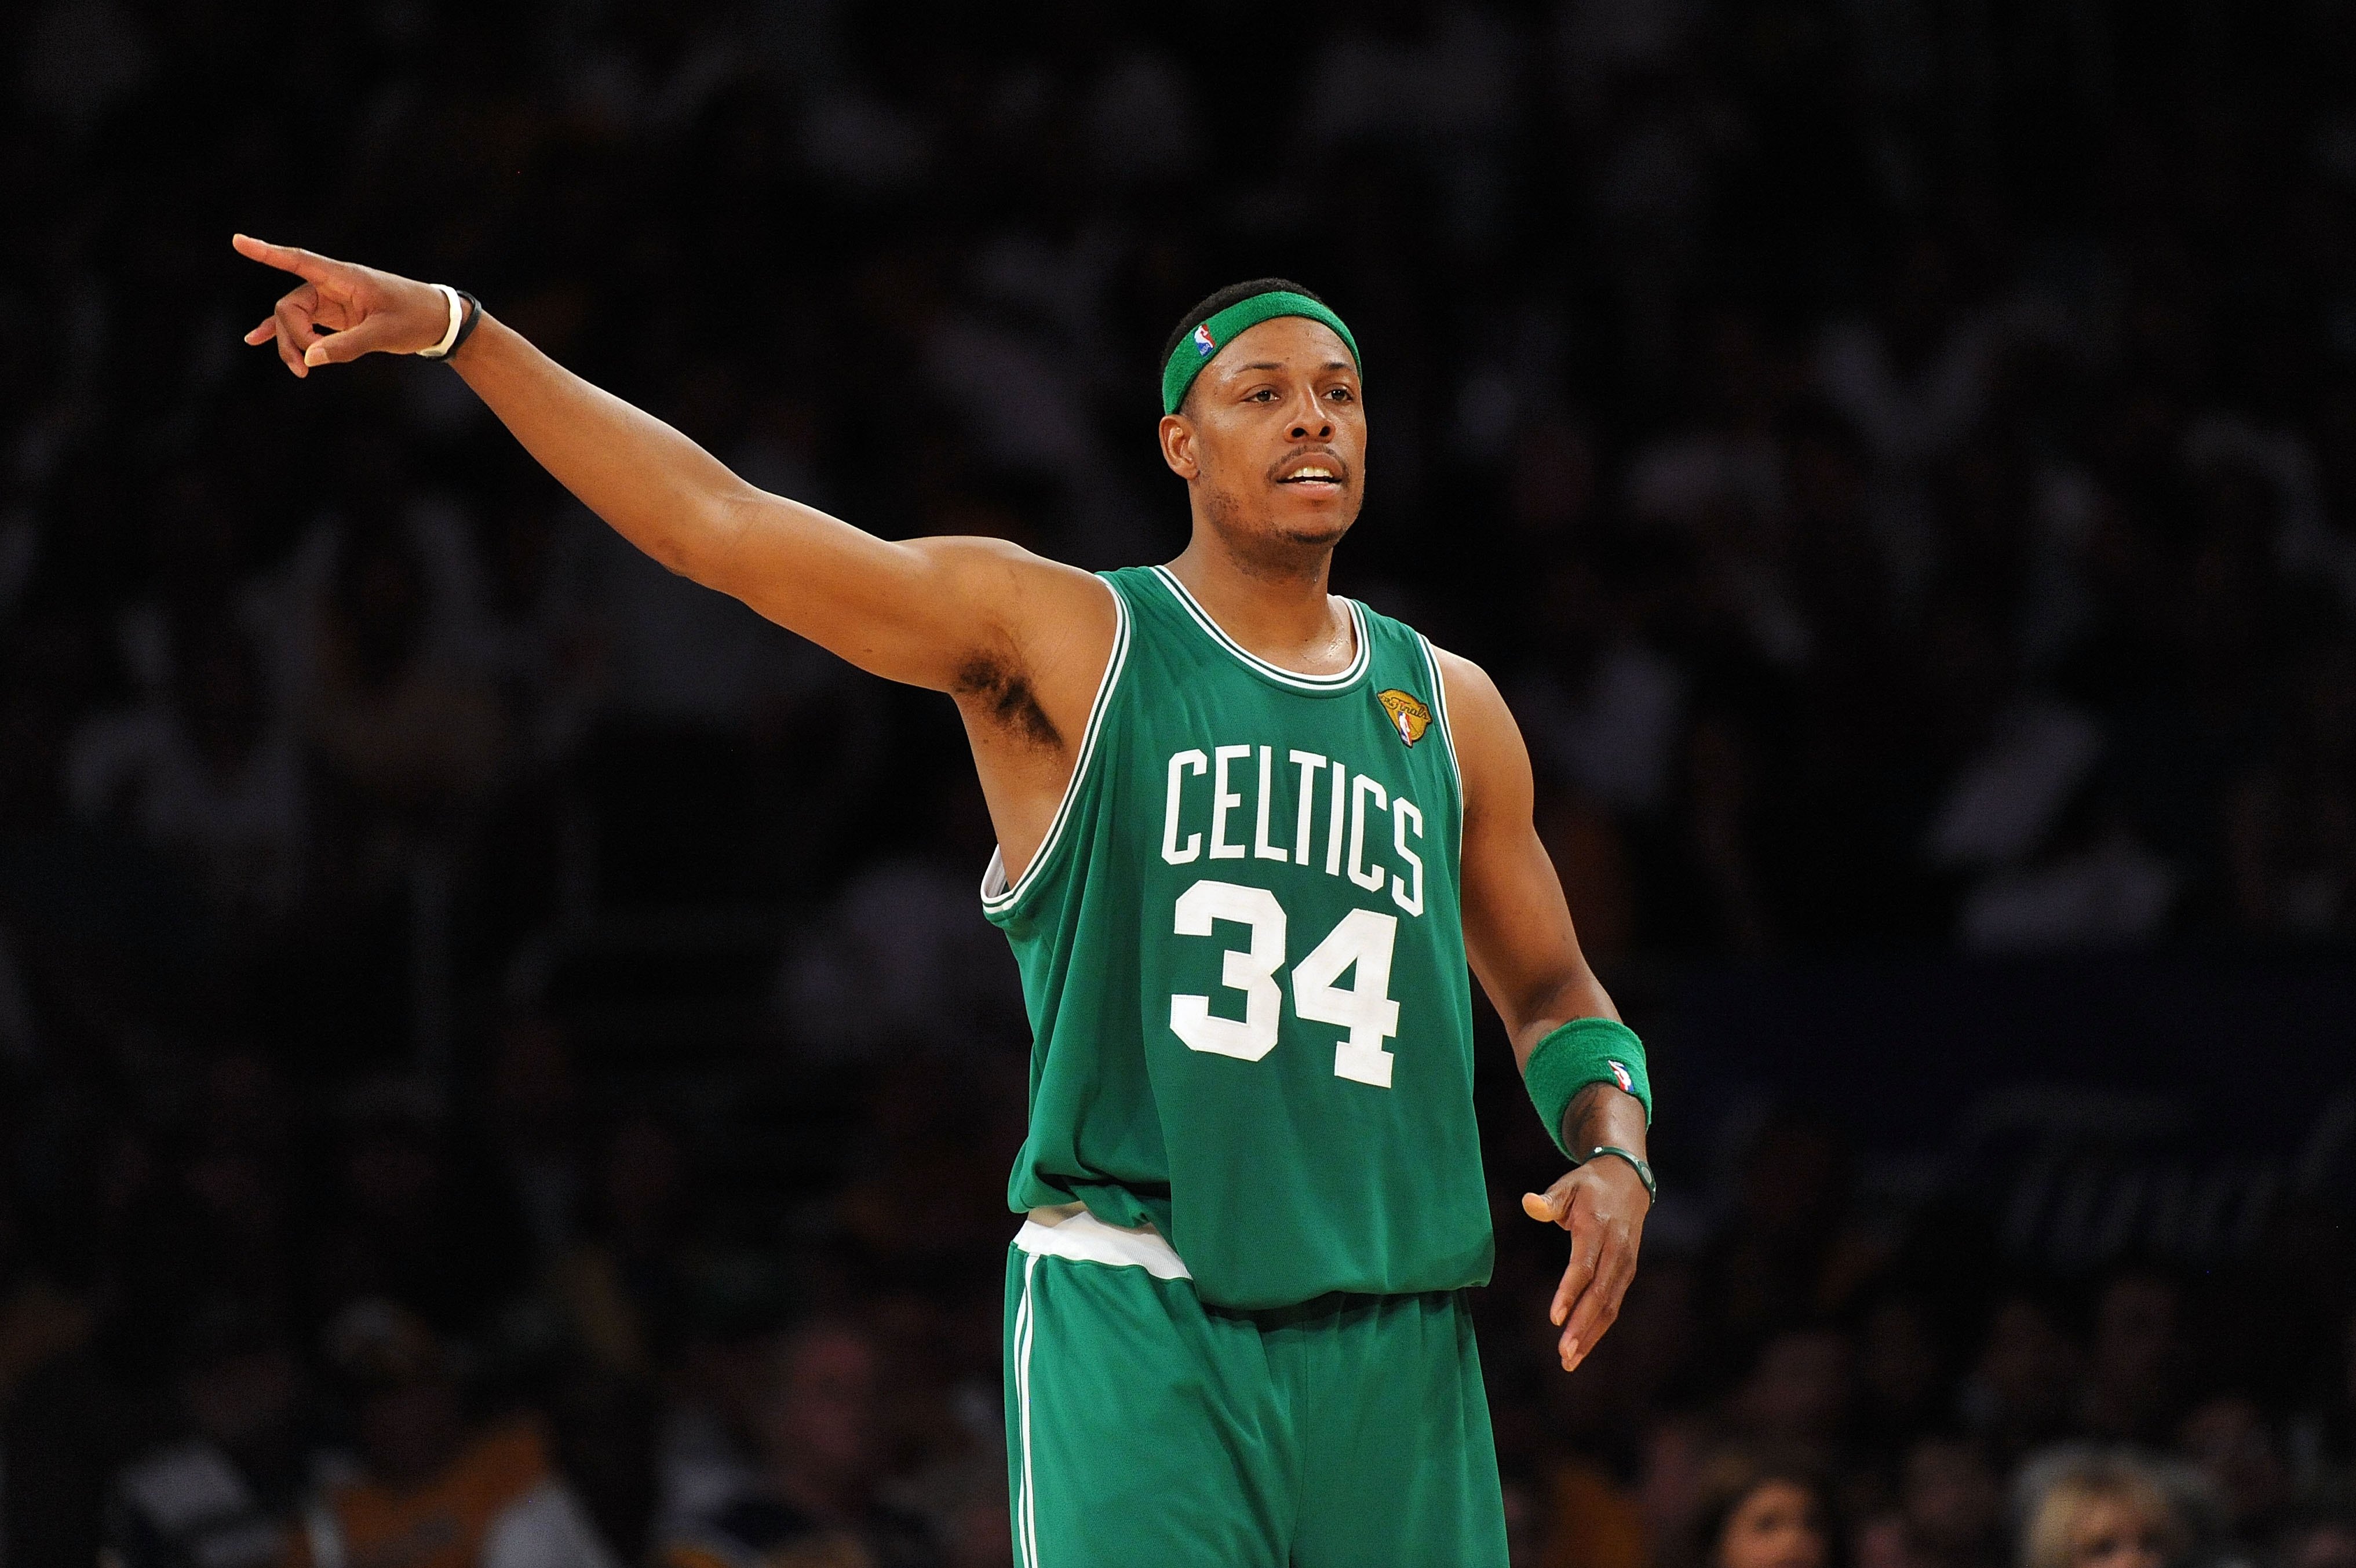 Paul Pierce of the Boston Celtics gestures on court against the Los Angeles Lakers.